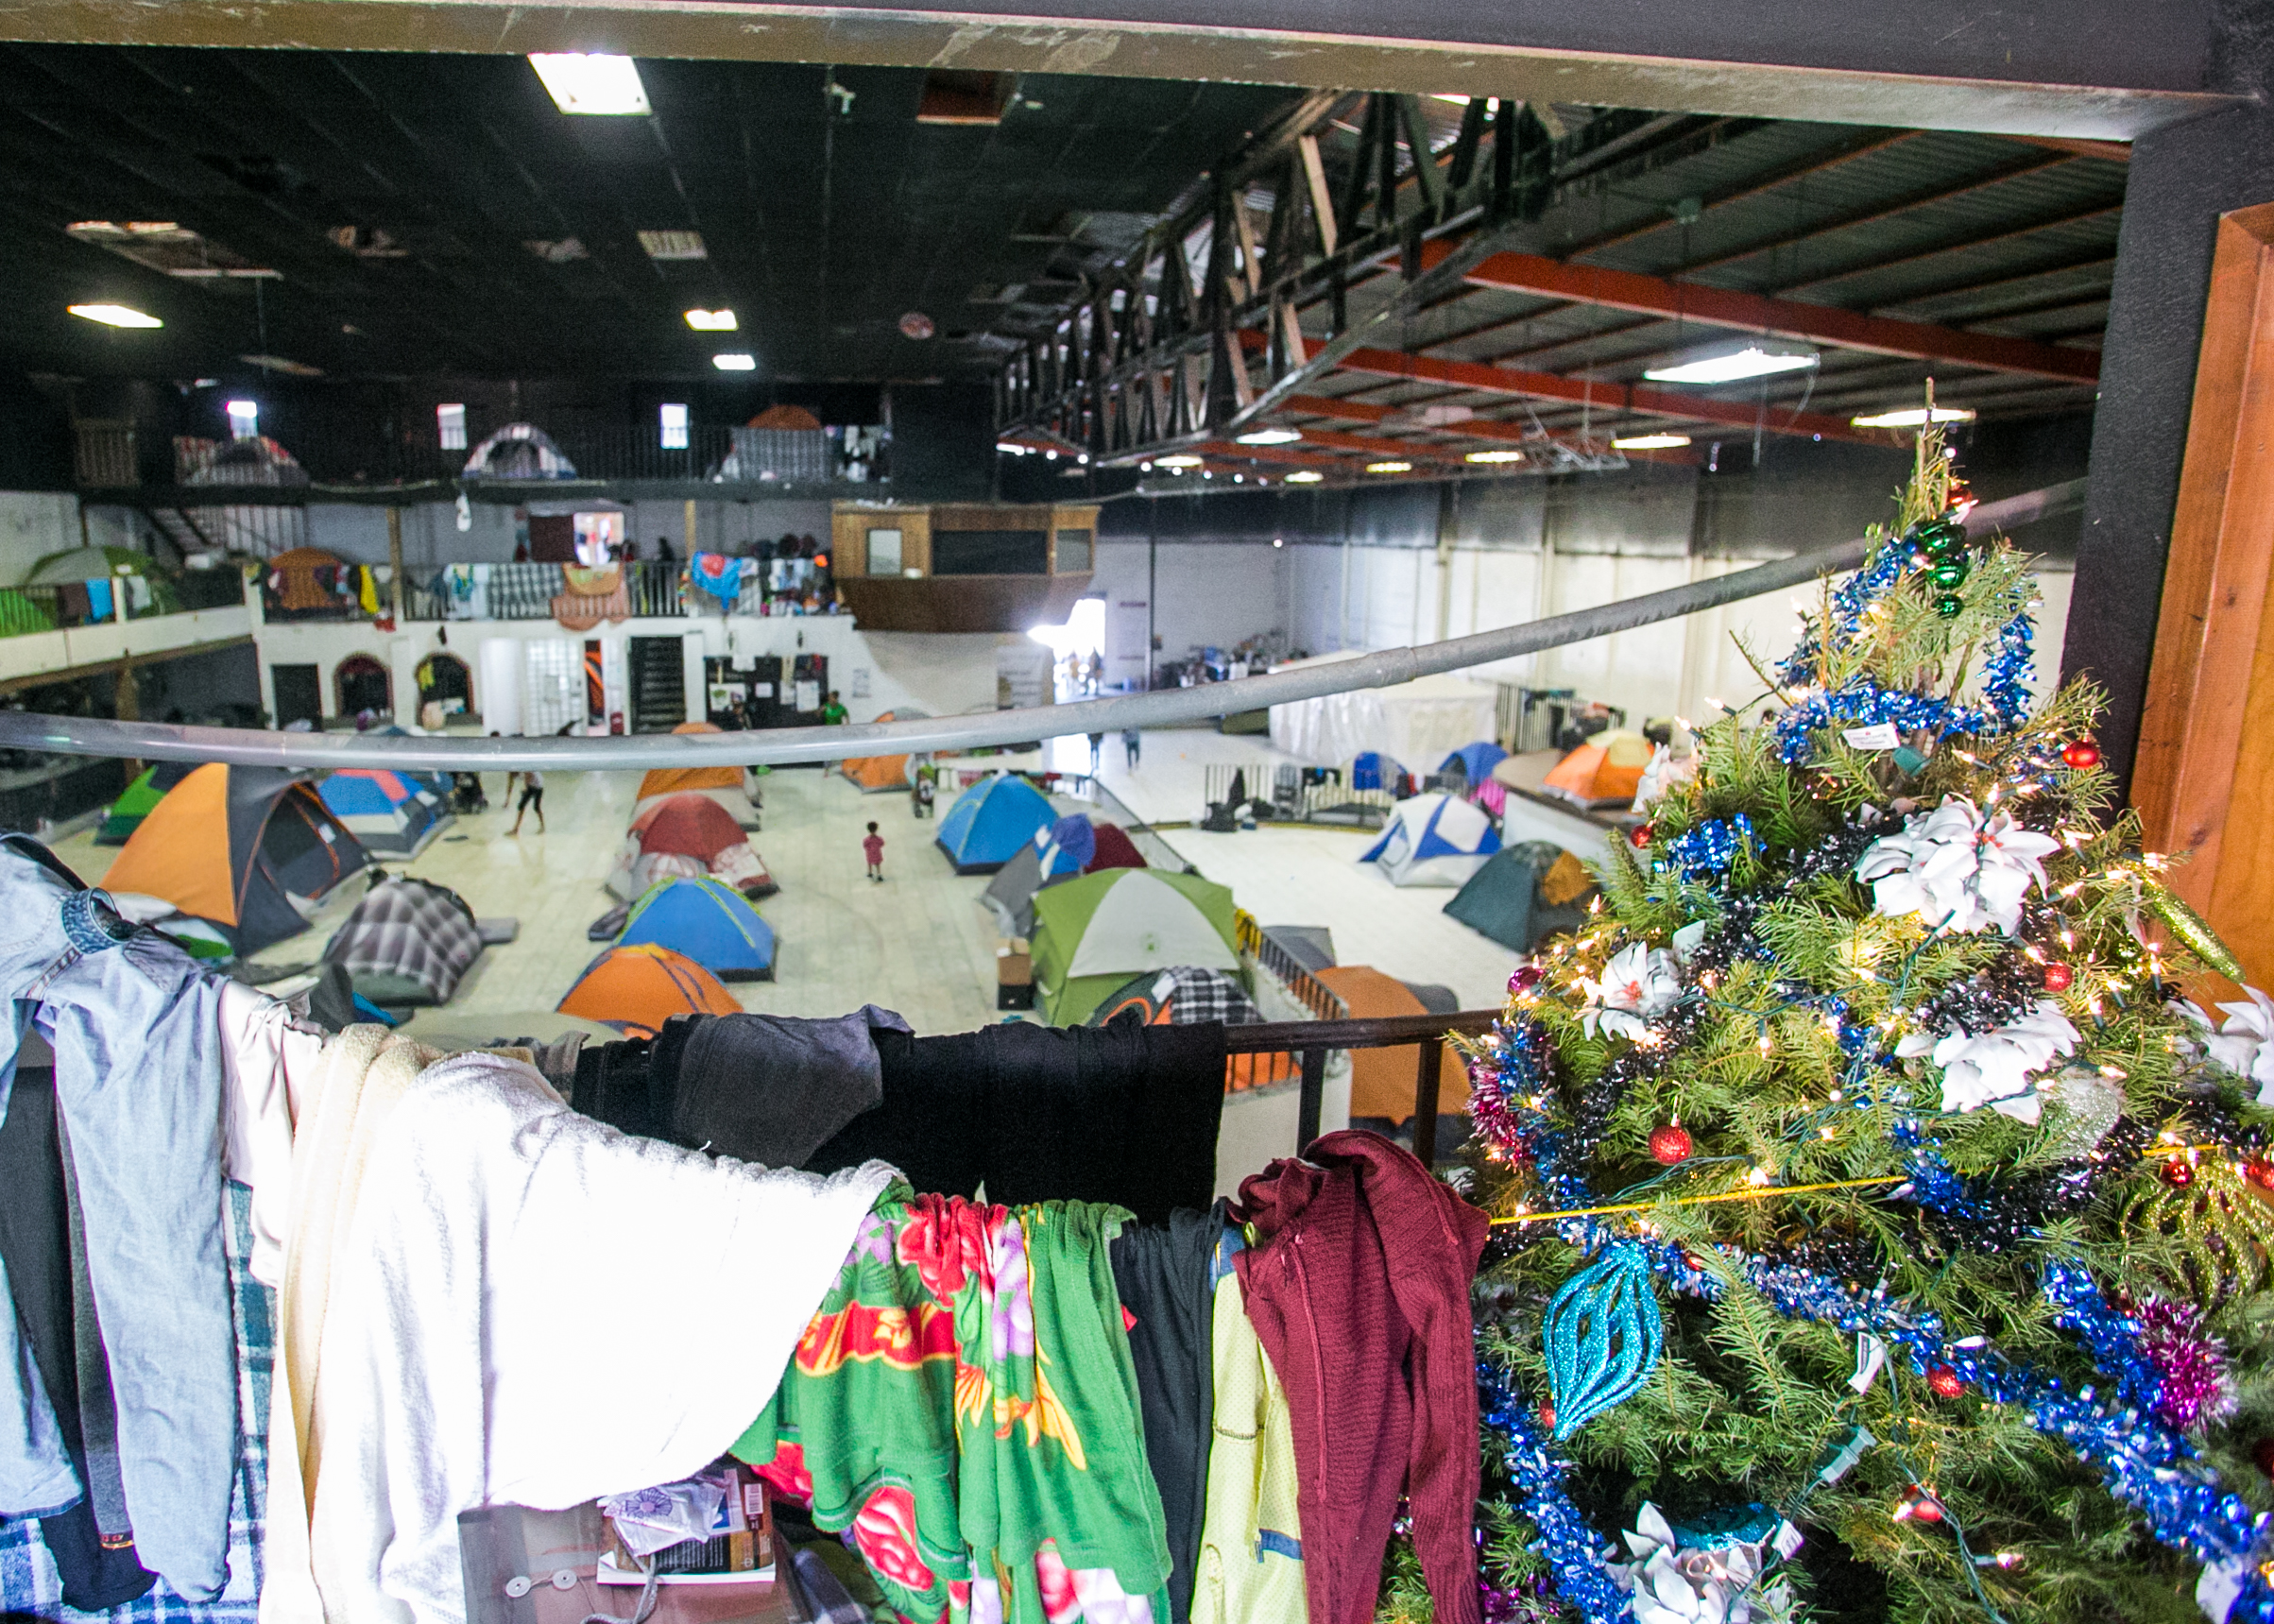  Laundry dries next to a Christmas tree that was recently donated to the Barretal refugee camp in Tijuana, Mexico. Many families have been waiting for over two months - and will spend Christmas in the compound. 